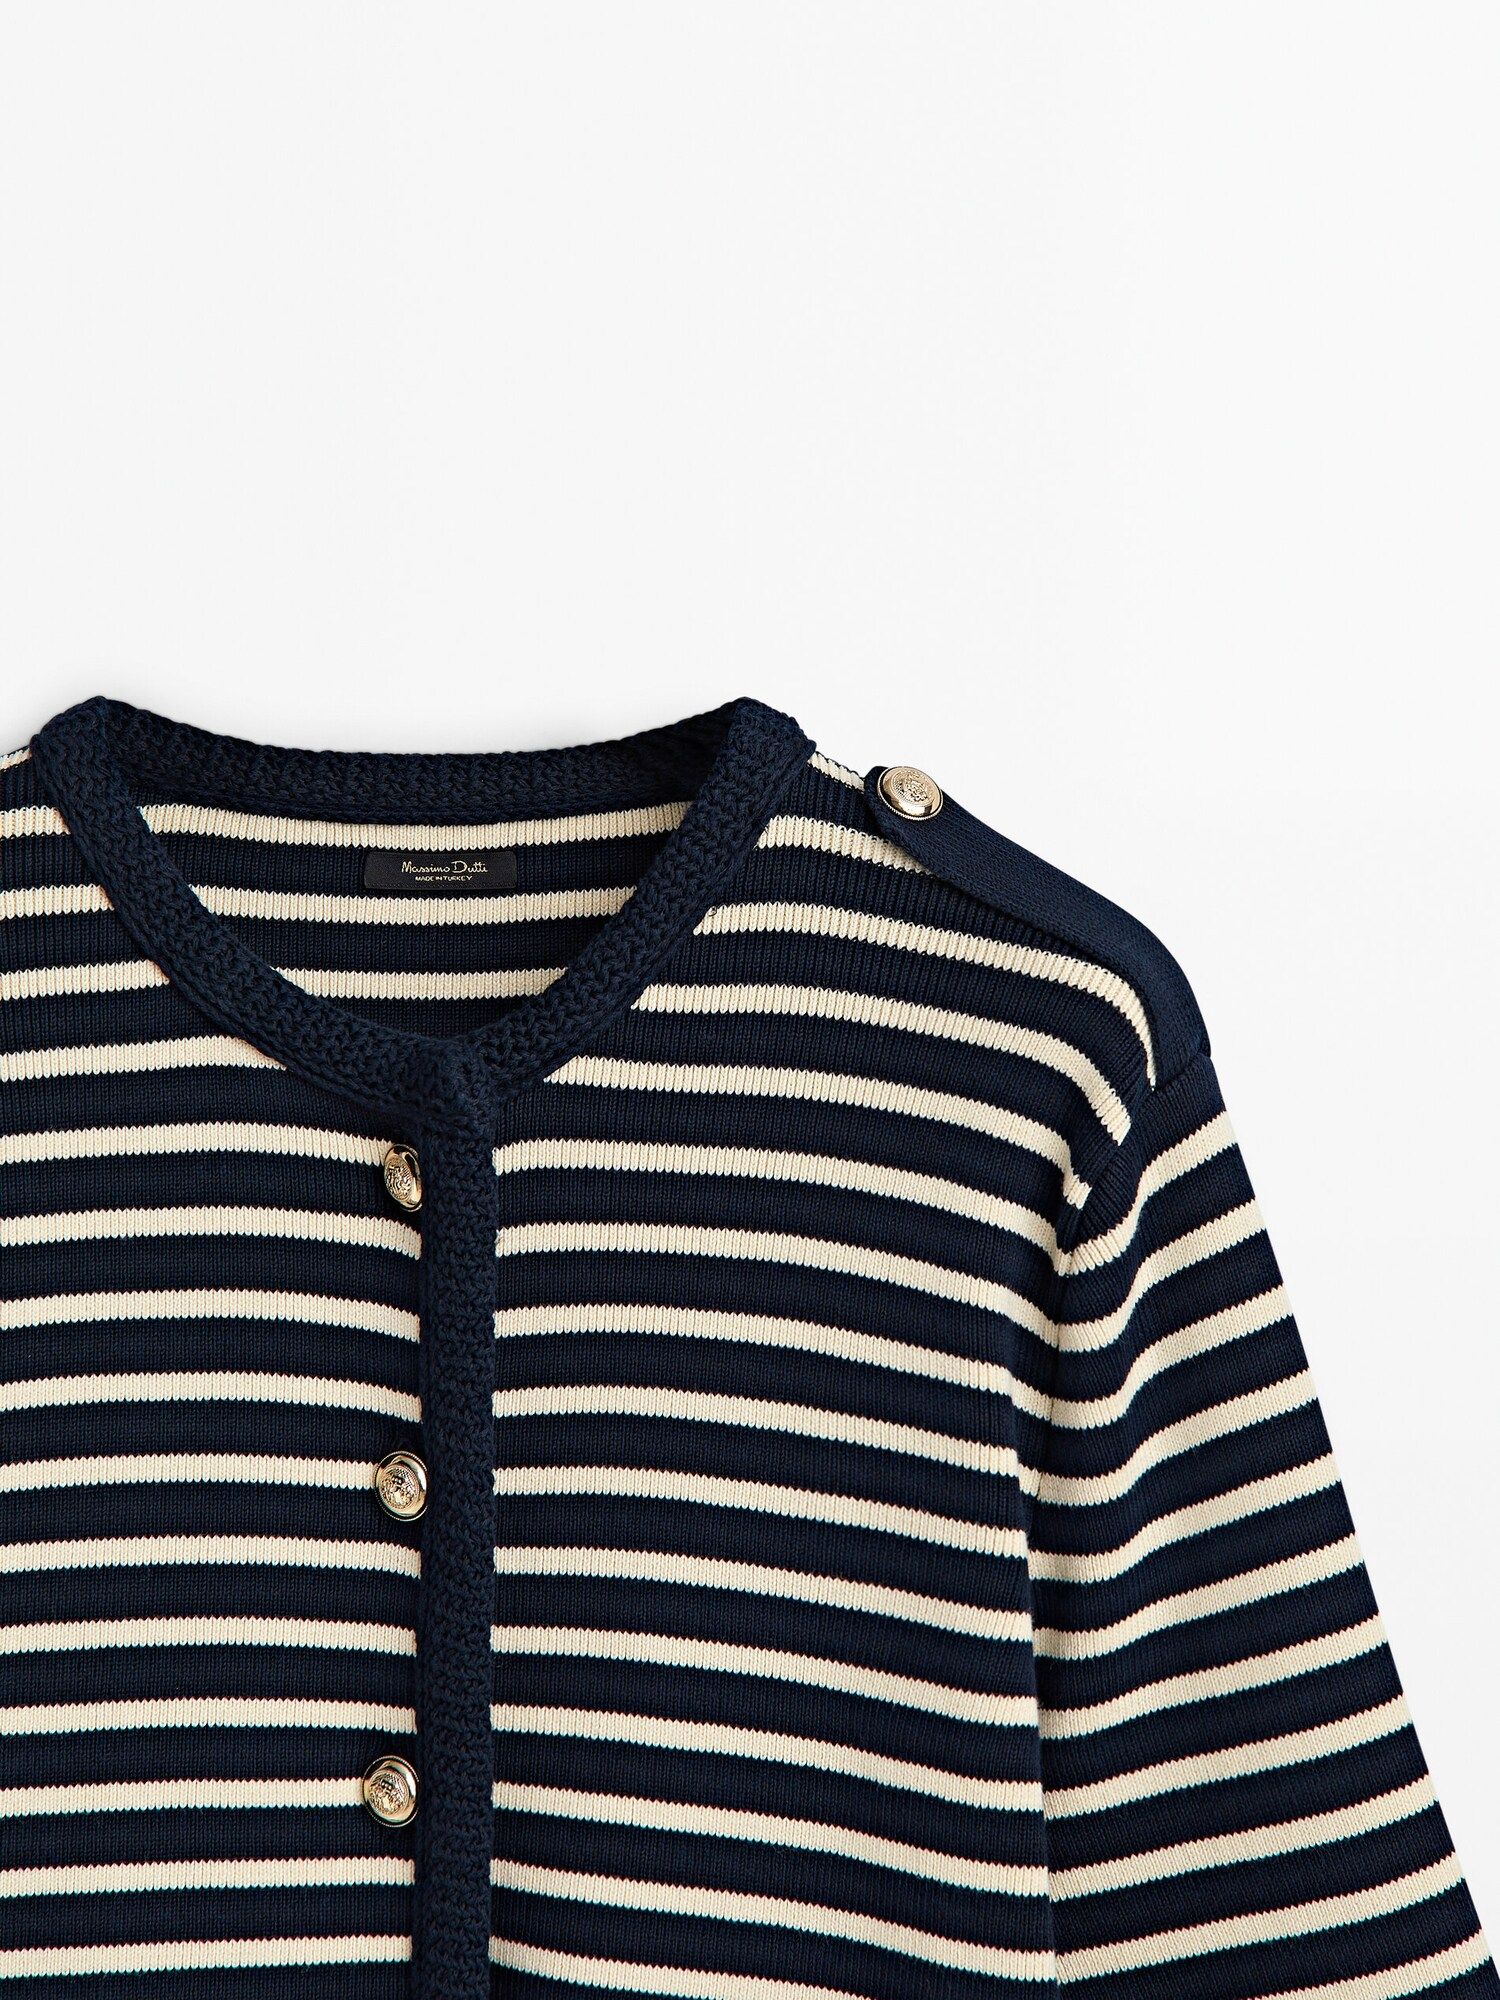 Striped knit cardigan with button detail on shoulder | Massimo Dutti (US)